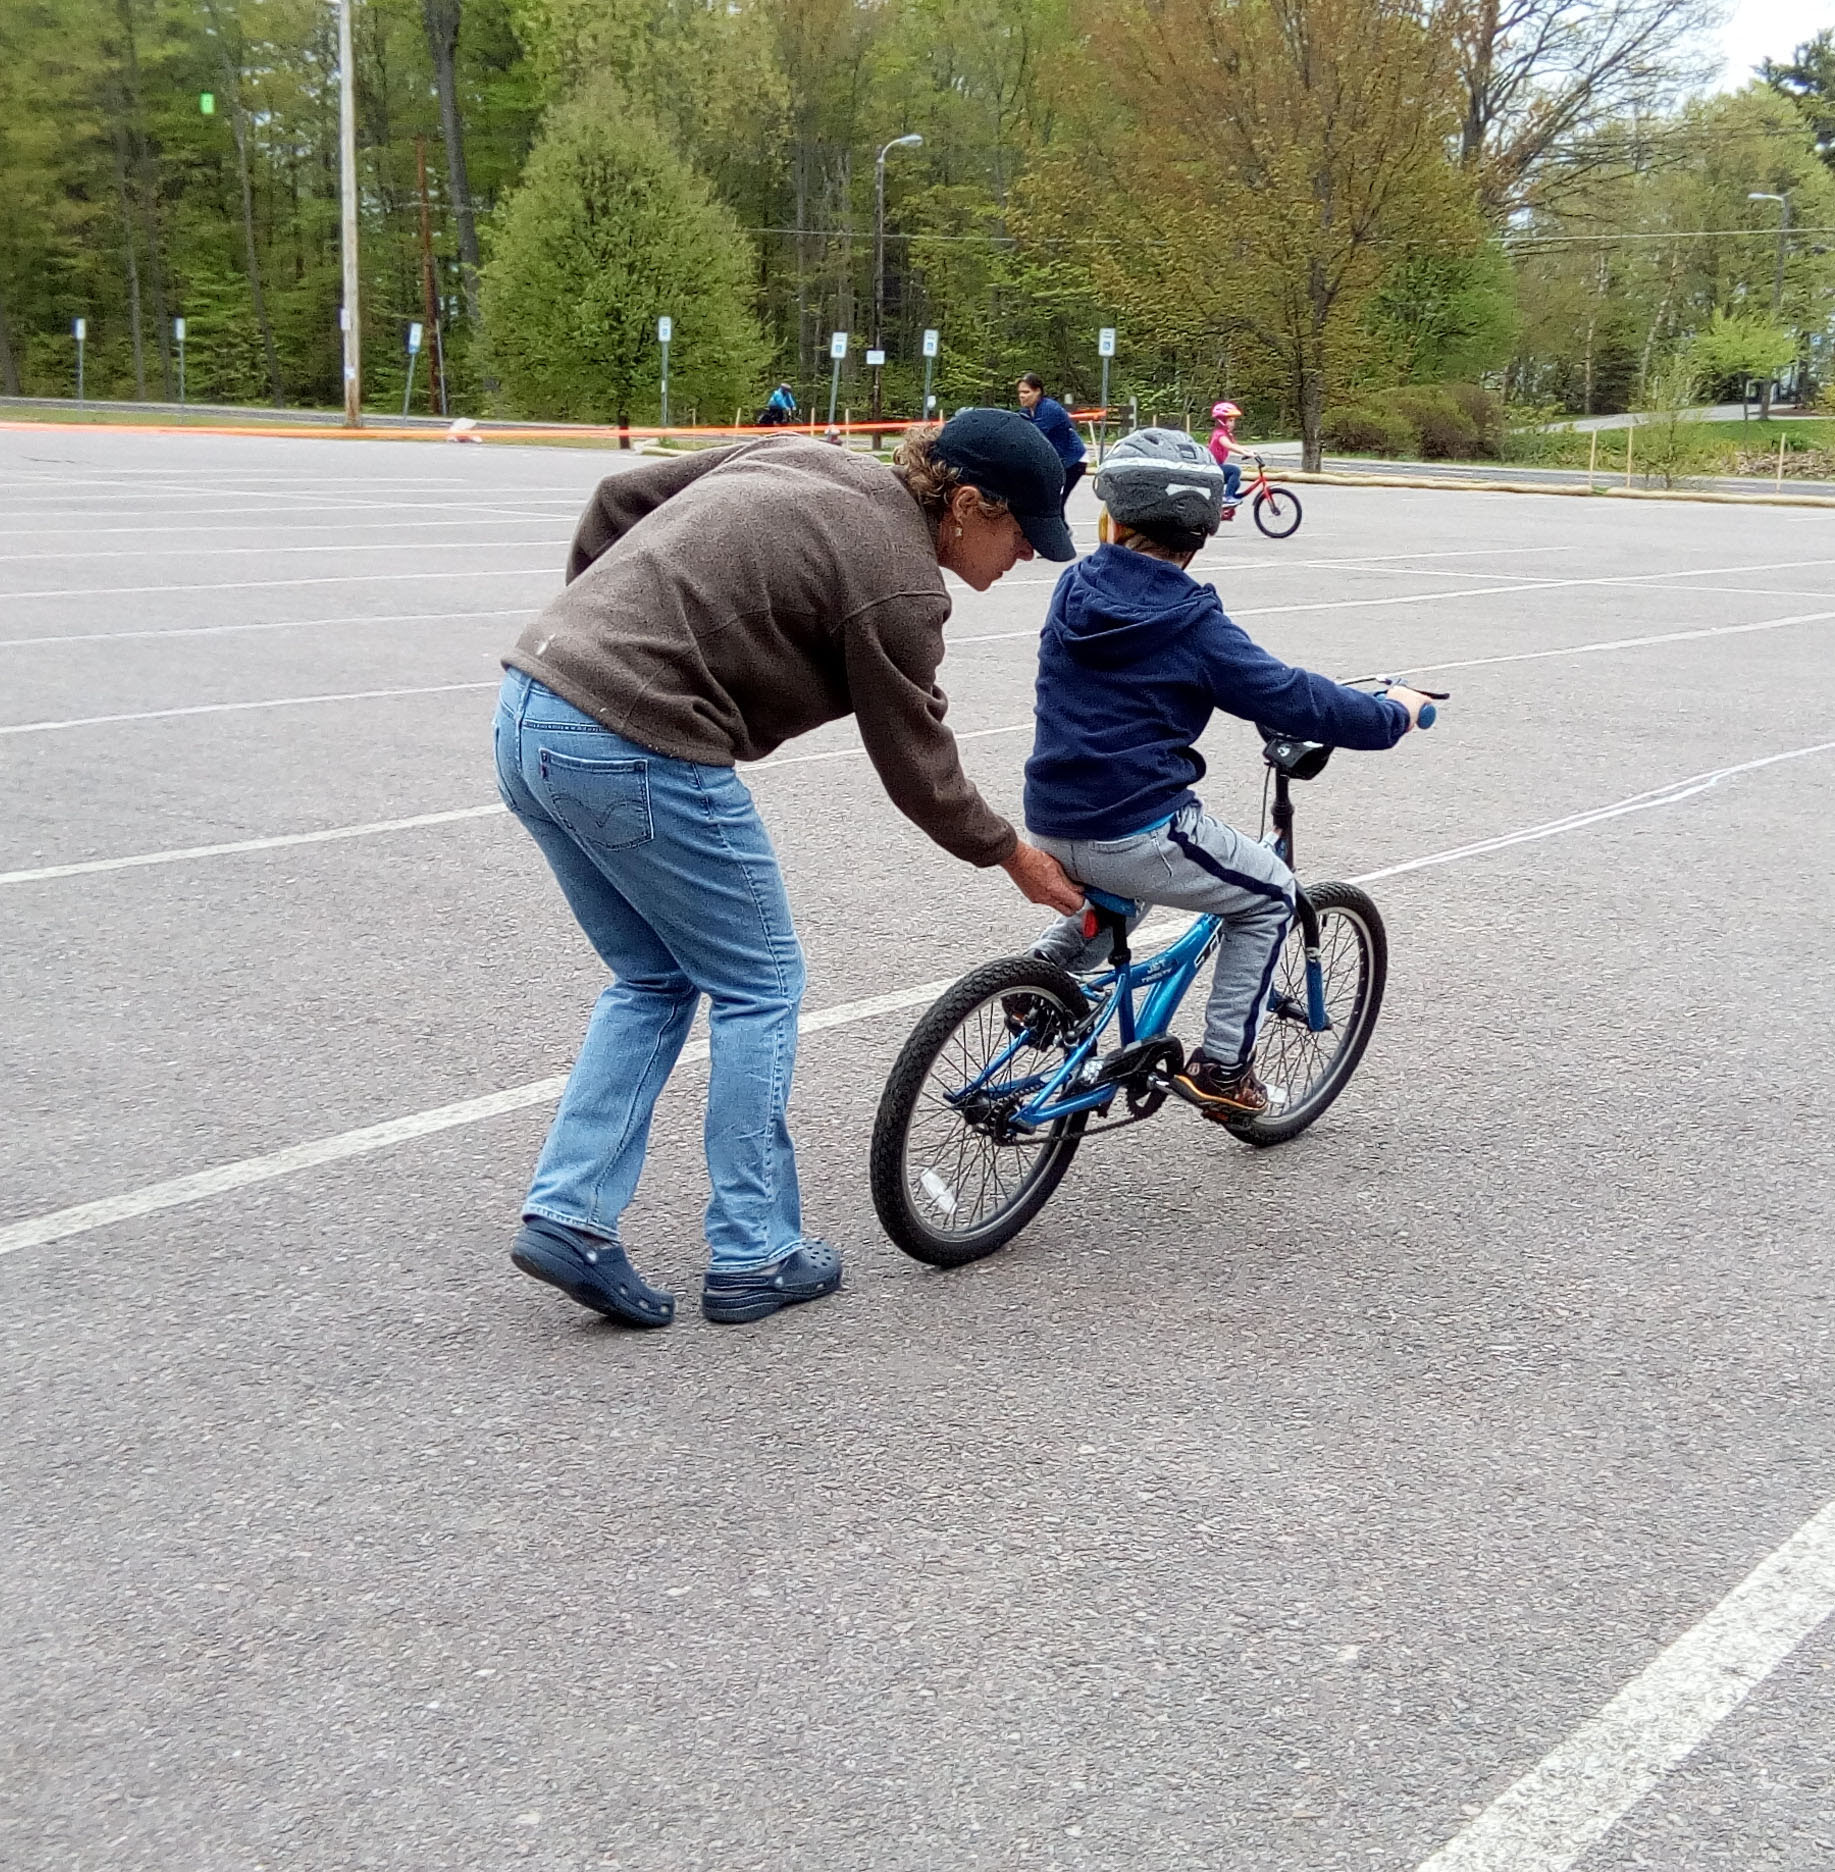 Volunteer holding back of child's bike as they learn to ride

without training wheels for the first time in an empty parking lot